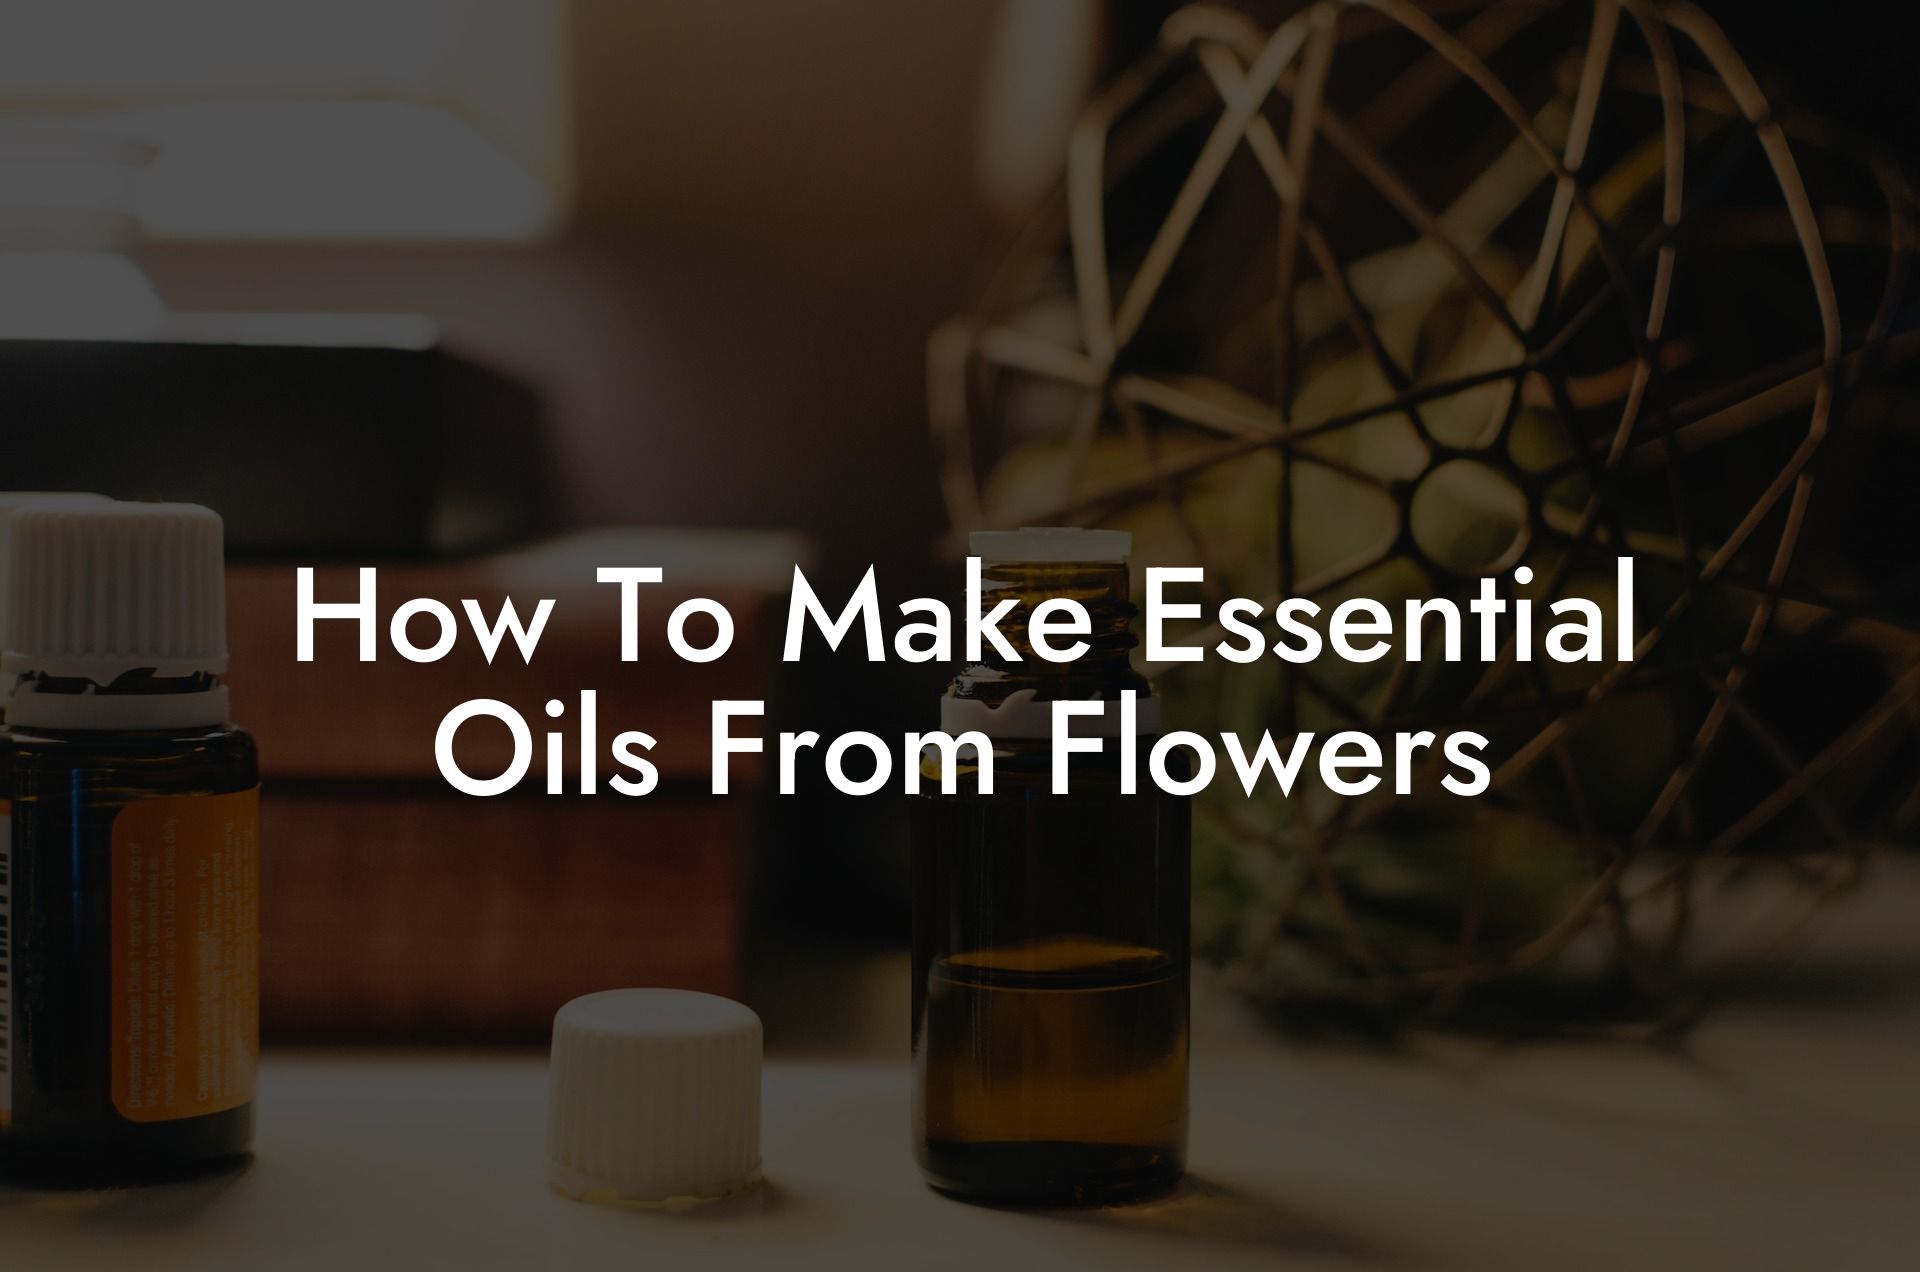 How To Make Essential Oils From Flowers